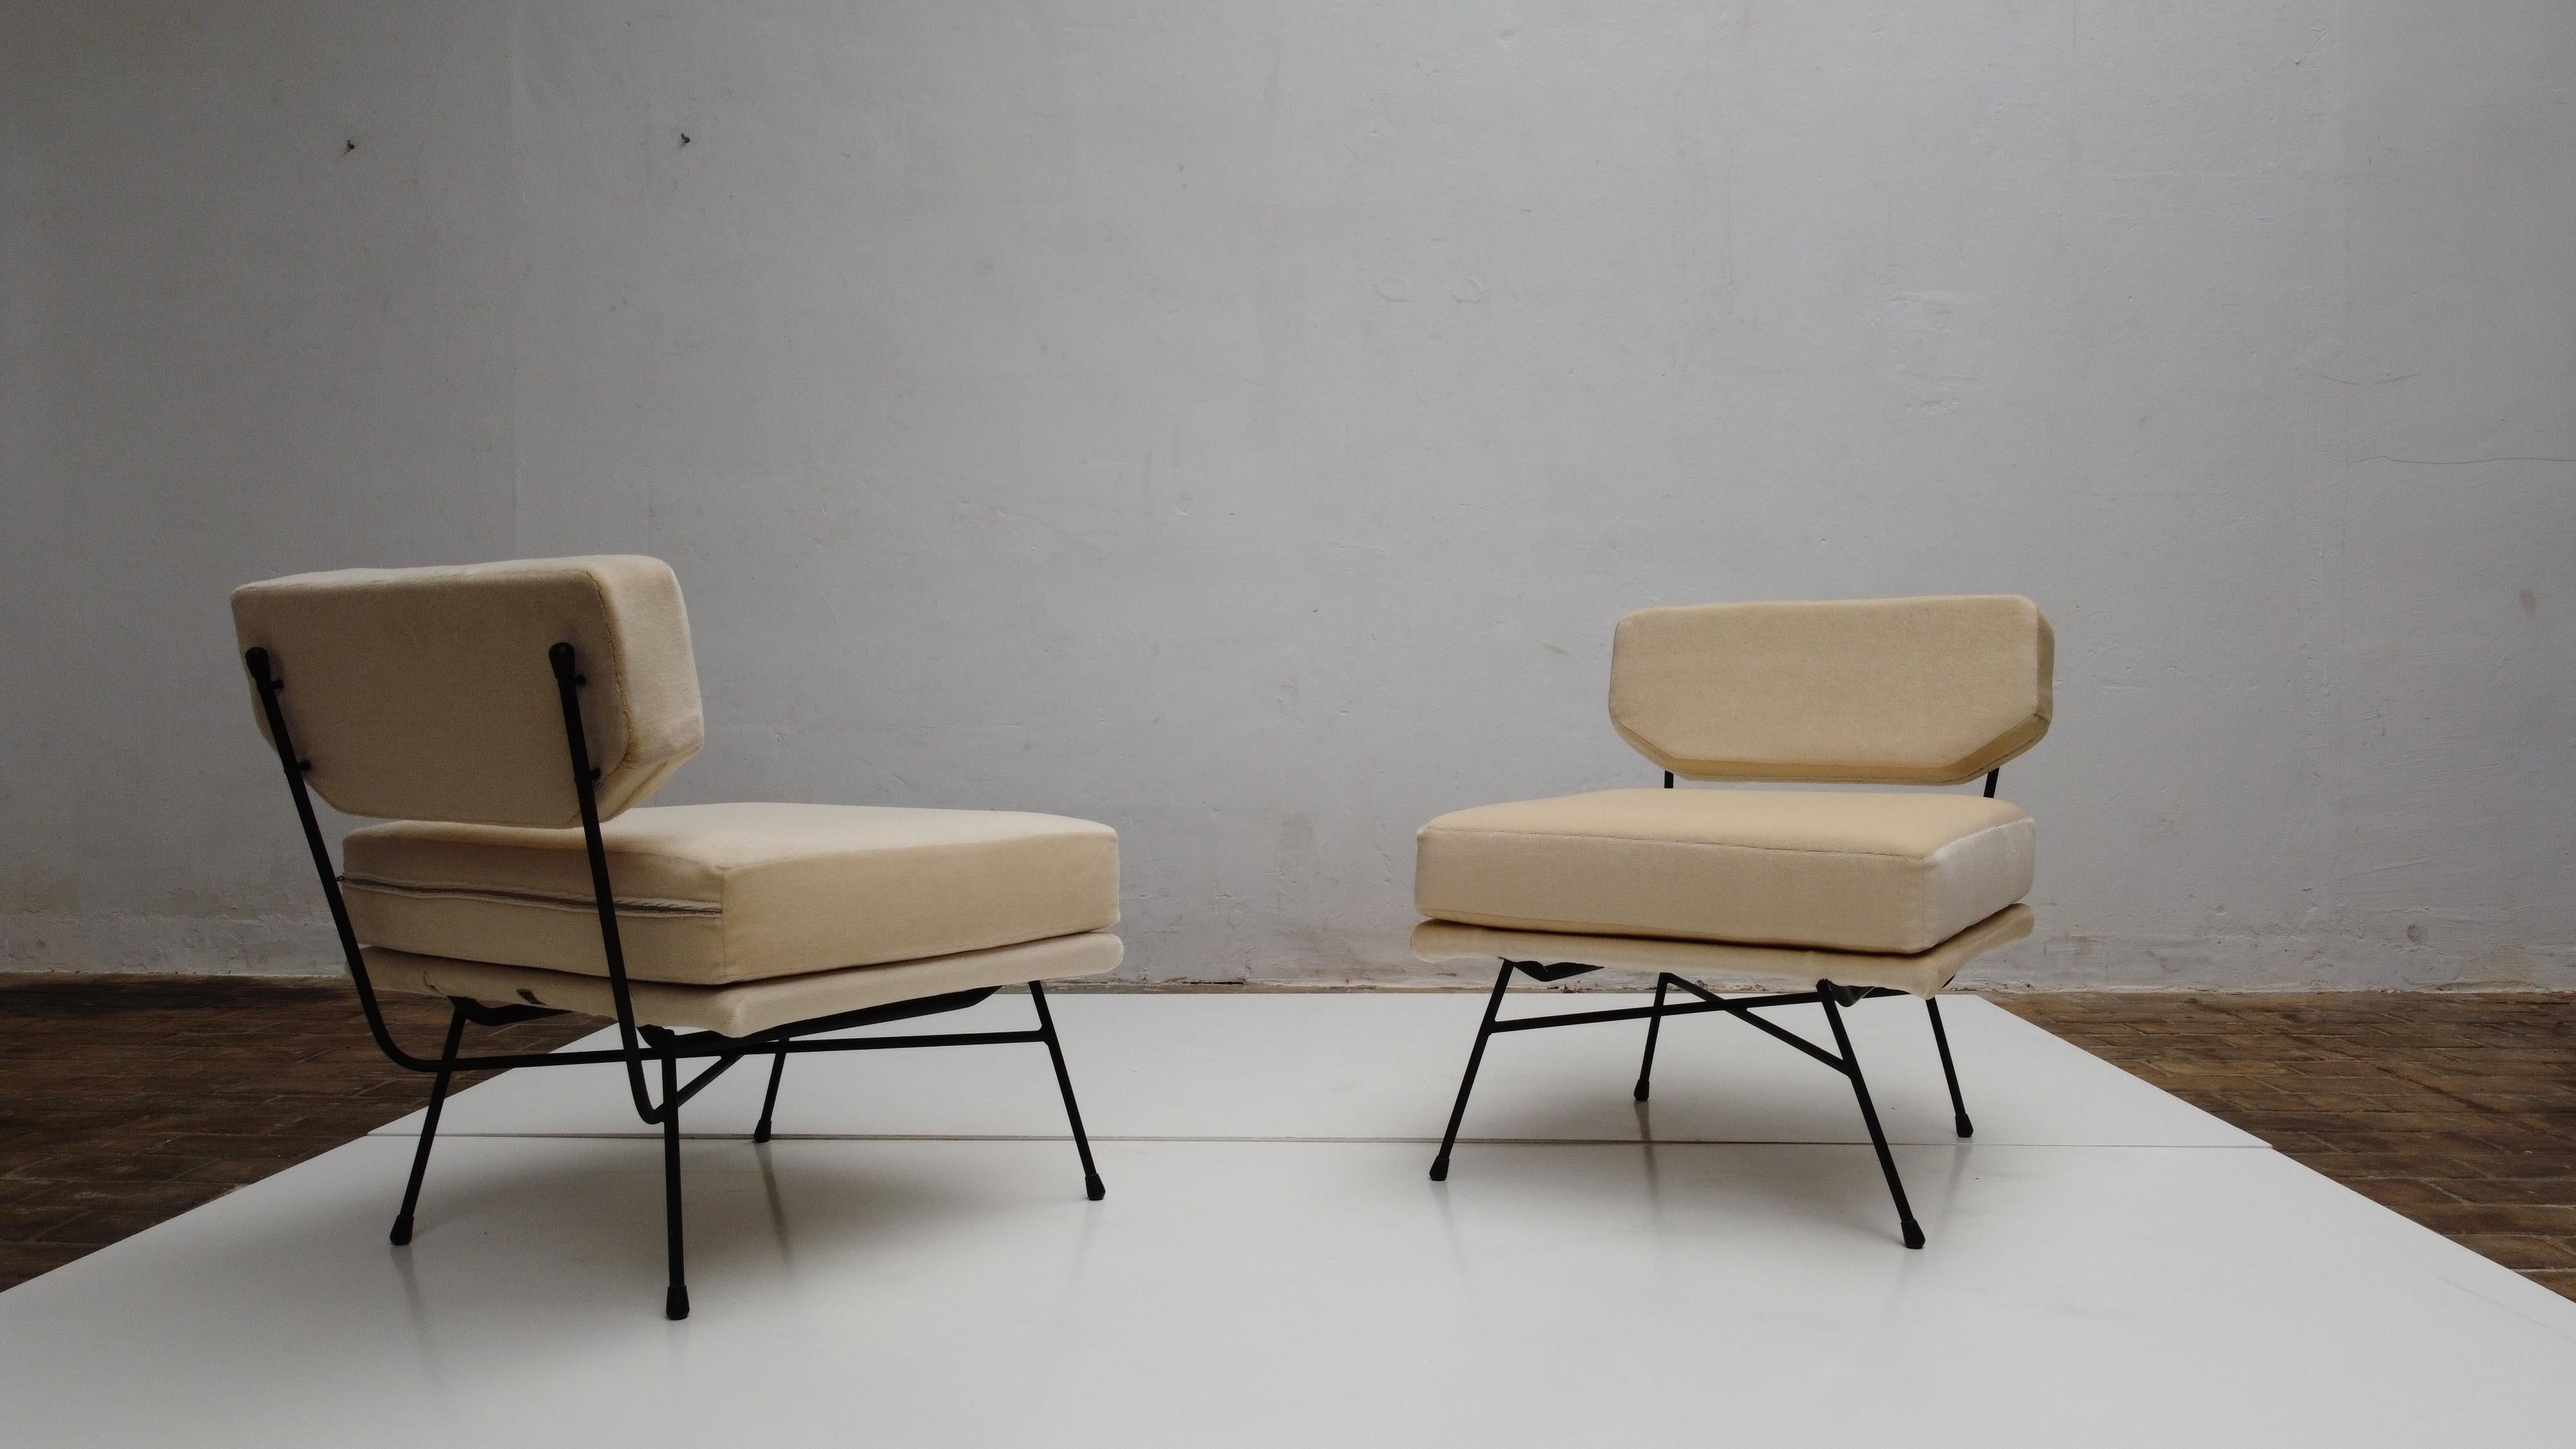 Pair of 'Elettra' Lounge Chairs by BBPR, Arflex, Italy 1953, Compasso D'Oro 1954 3